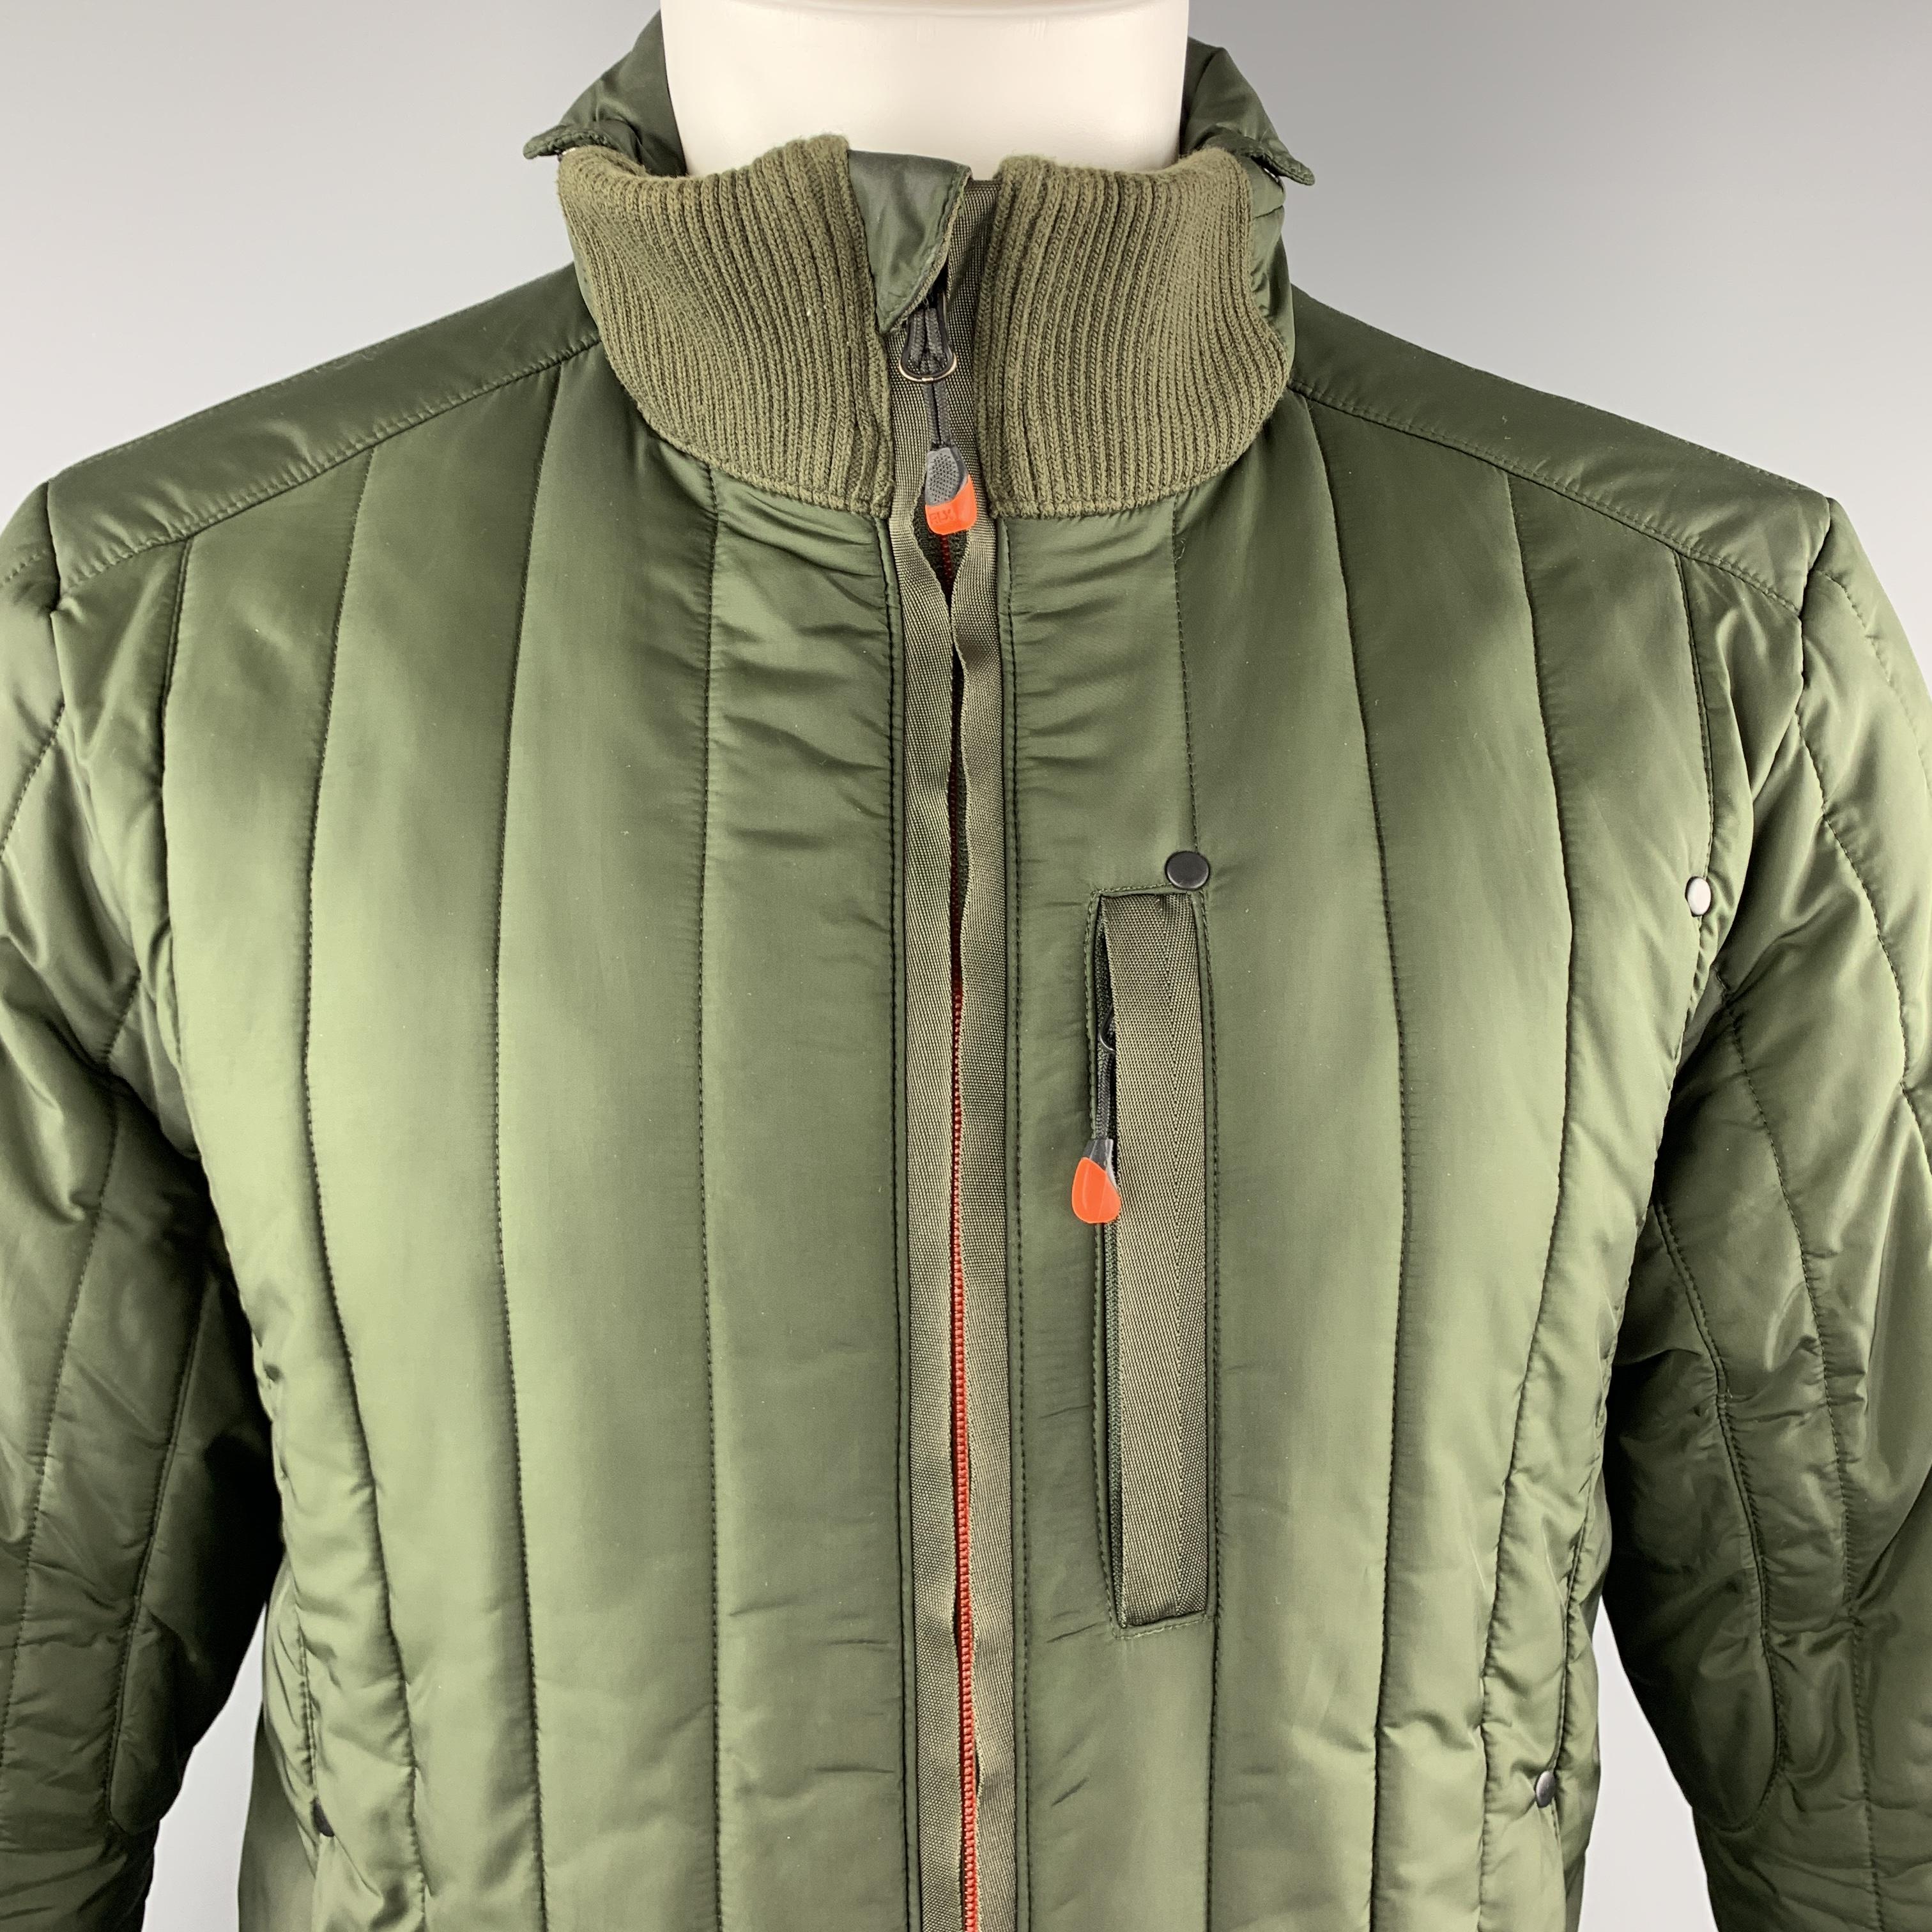 RLX by RALPH LAUREN comes in olive green quilted nylon with orange zippers, three slit zip pockets, and high ribbed knit collar with snap detail. Minor wear on liner.

Excellent Pre-Owned Condition.
Marked: M

Measurements:

Shoulder: 17 in.
Chest: